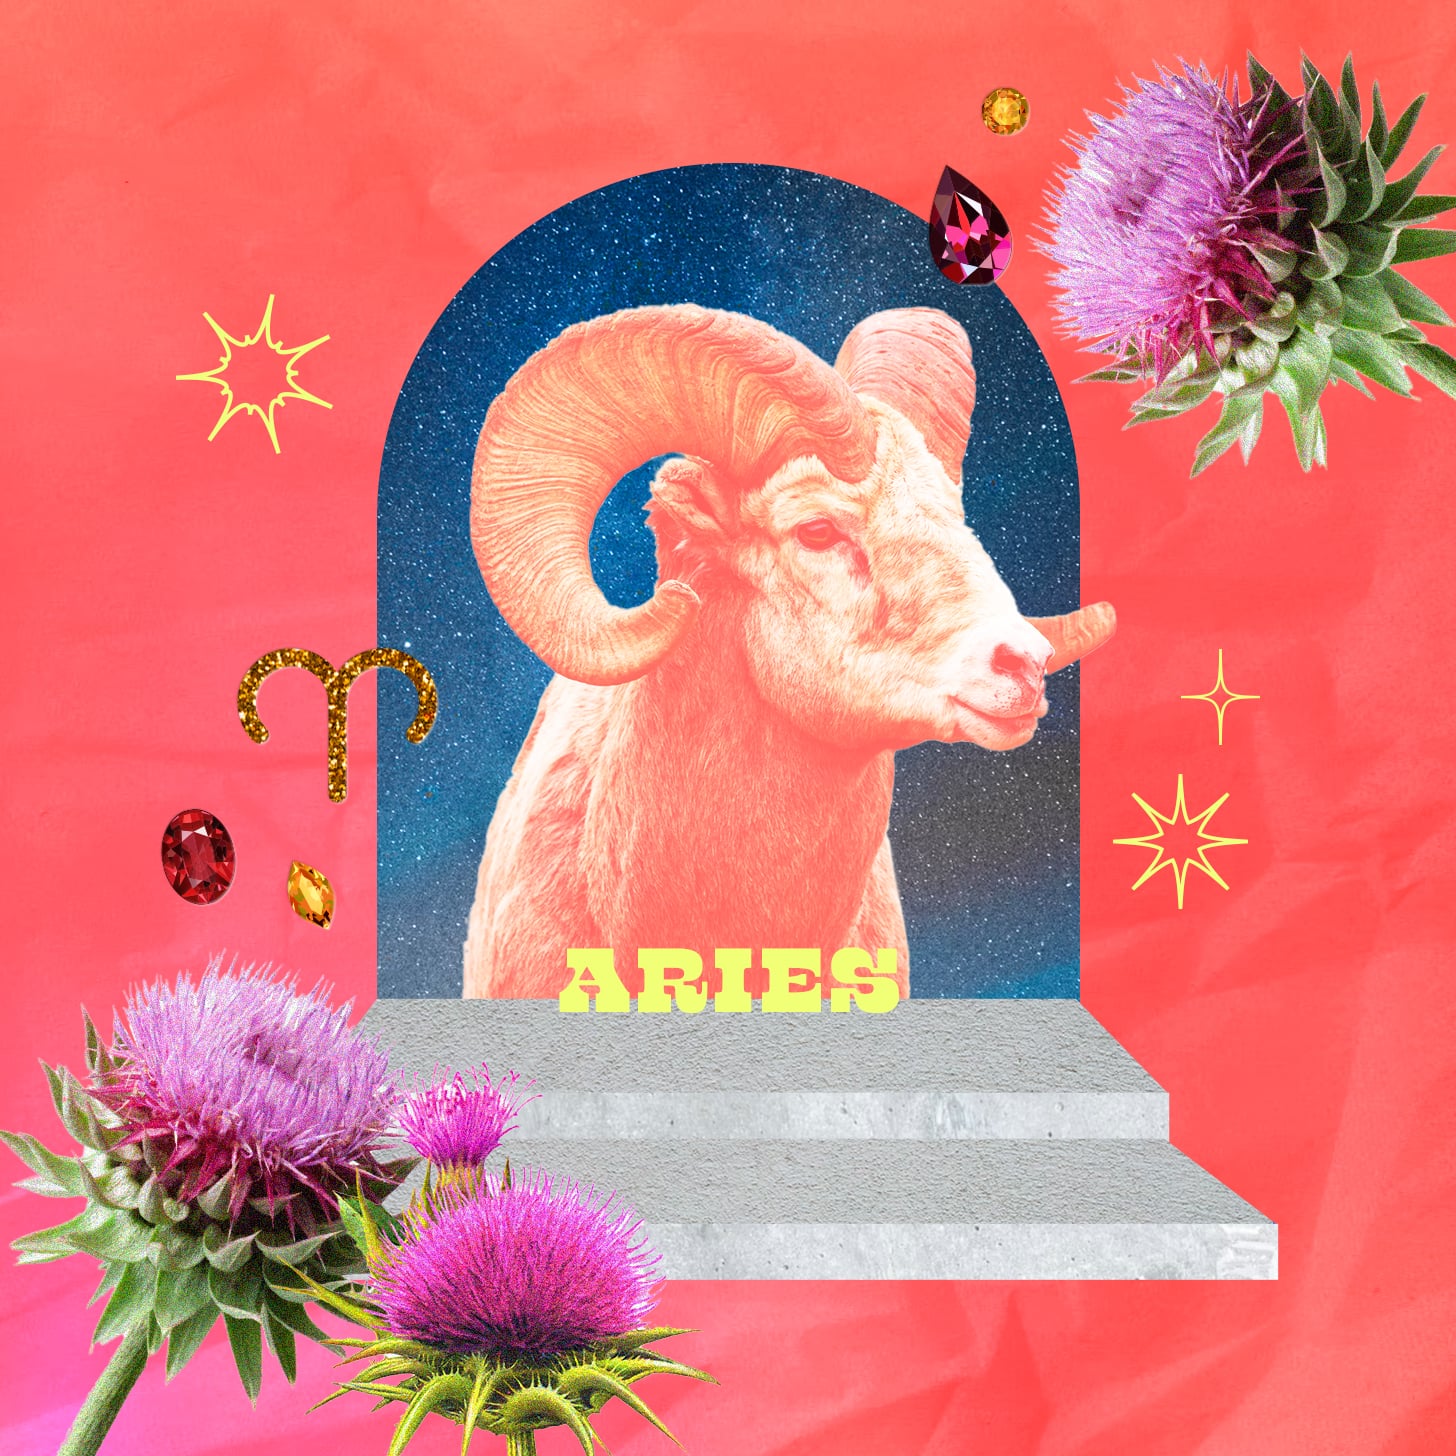 Aries weekly horoscope for June 19, 2022